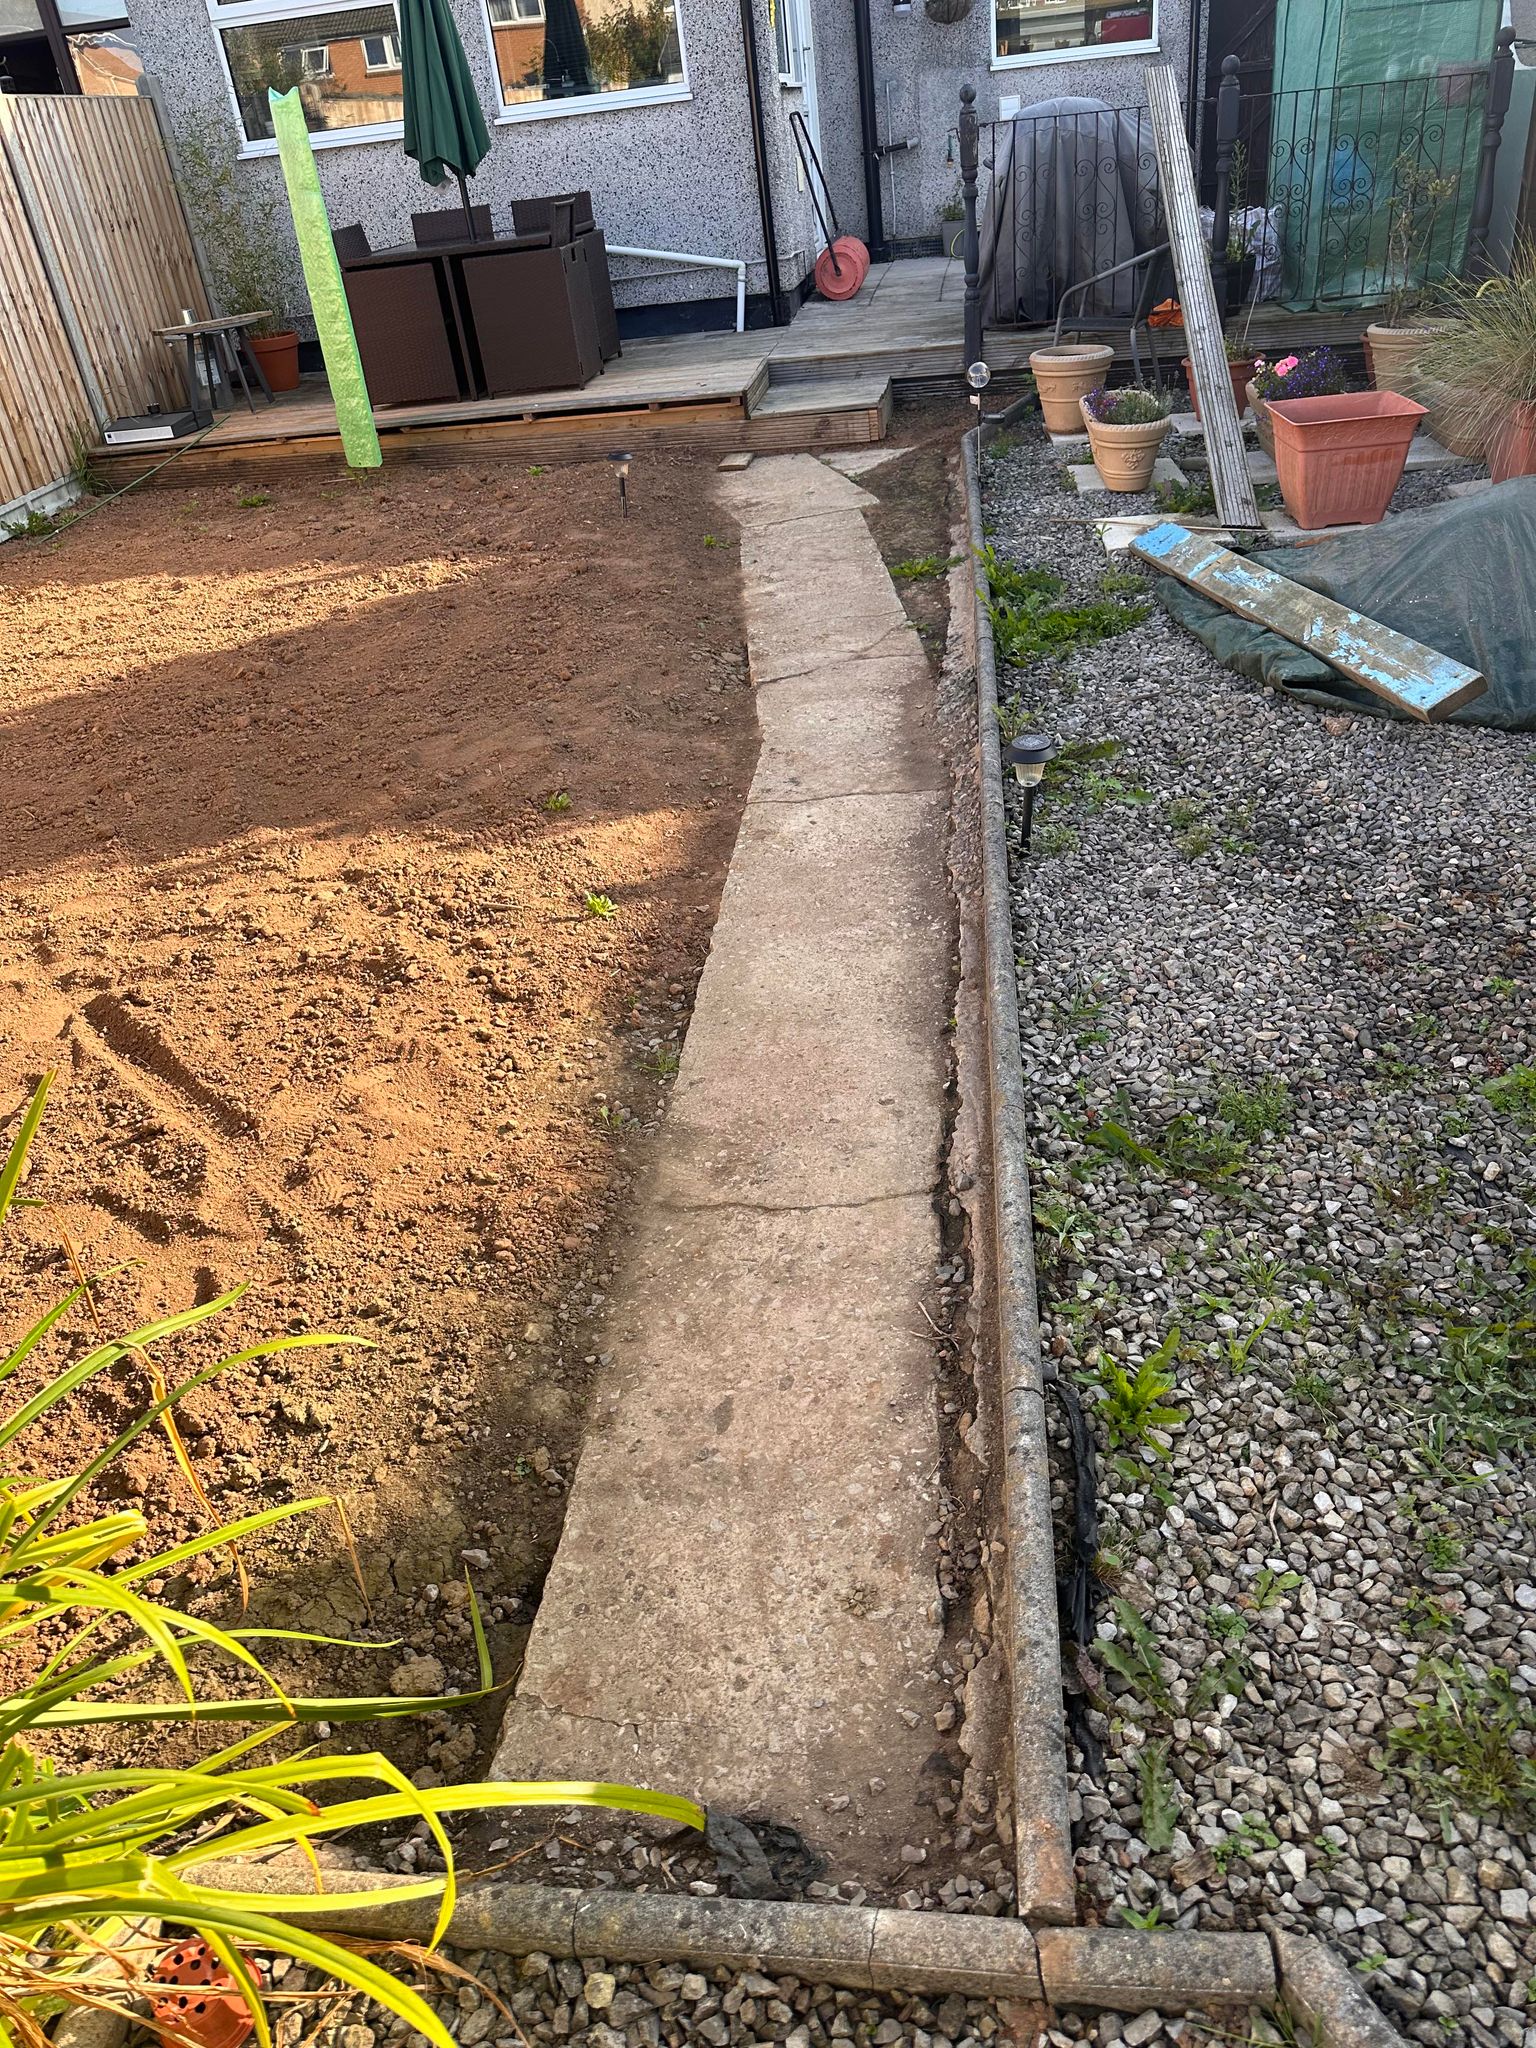 Steel Path edging for garden? - Steel Path edging for garden? - Ask a ...